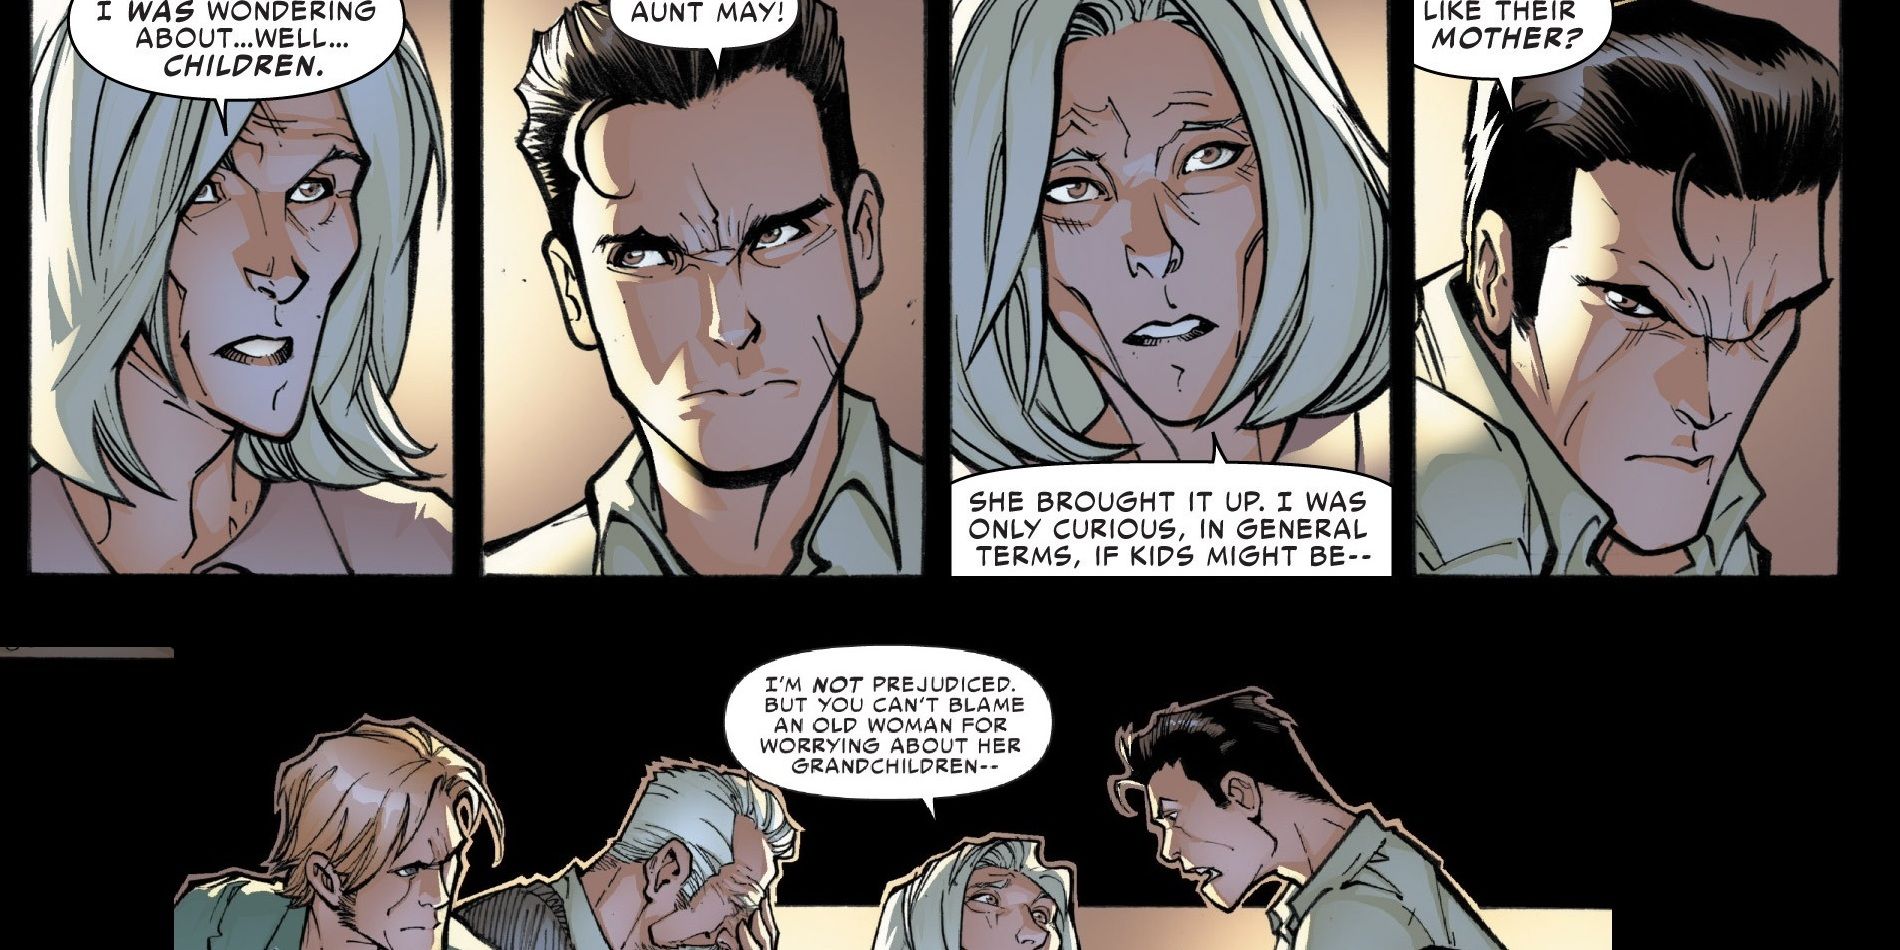 Aunt May talking to Peter Parker about Anna Maria Marconi 